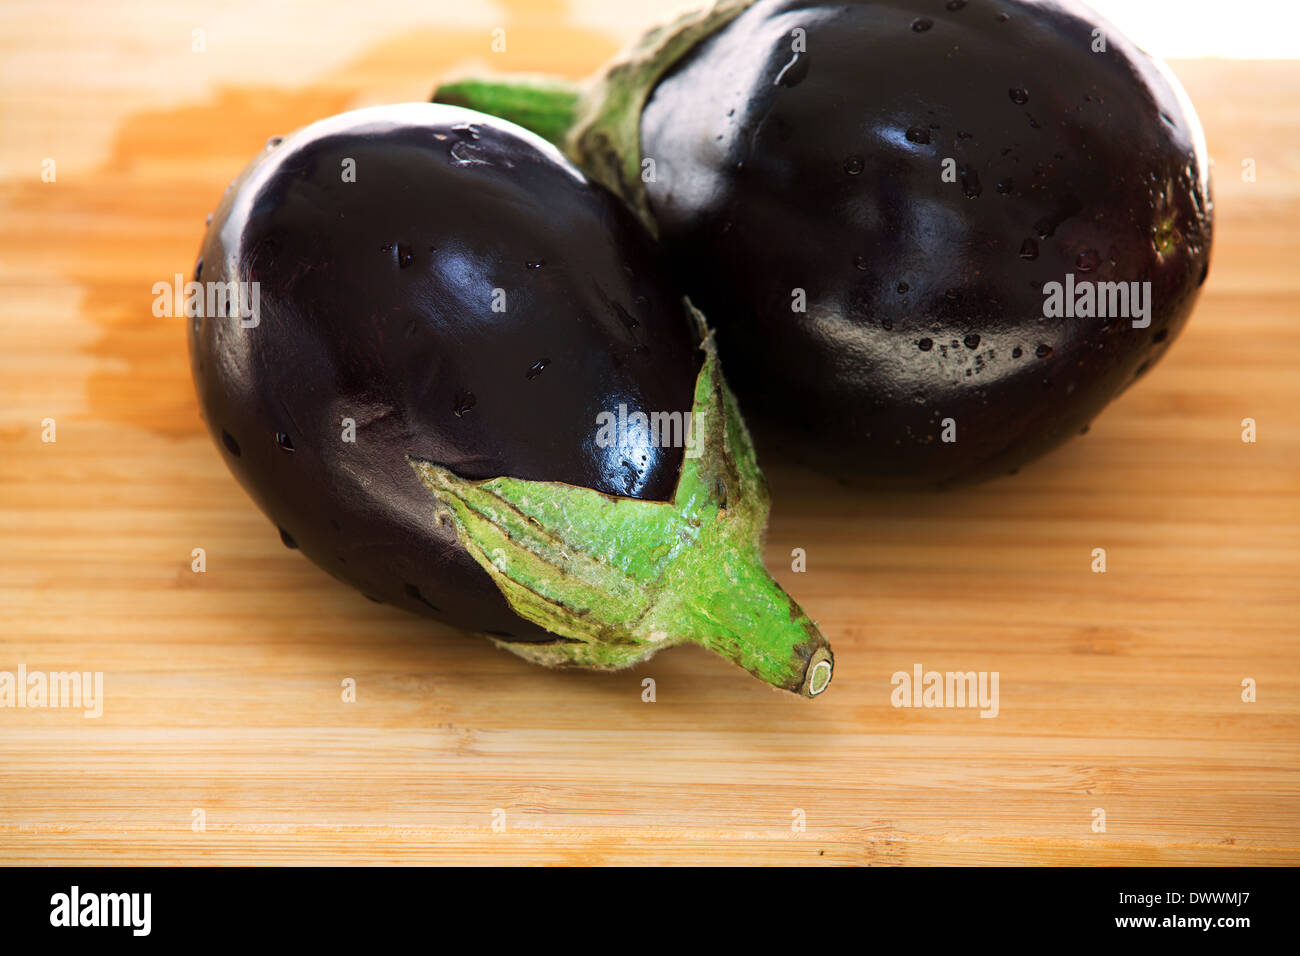 Eggplant, Vegetable,Aubergine, Freshness, Isolated, Food, Two Objects, Vegan Food, Purple, Organic, Healthy Eating, Nutrient, Stock Photo